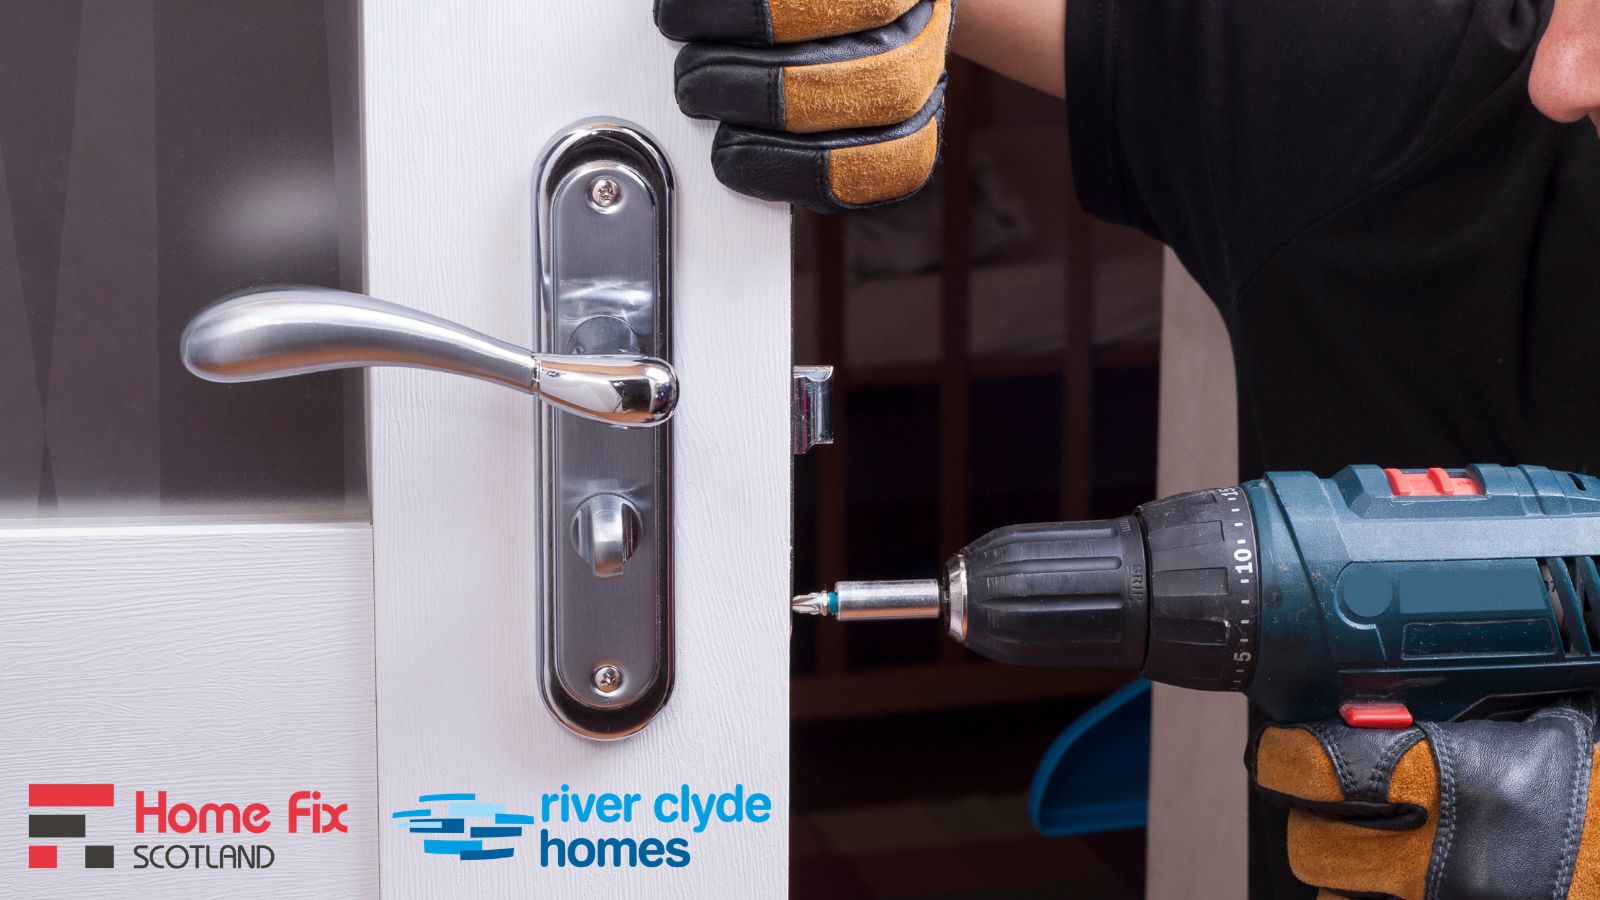 River Clyde Homes looks ahead to resuming repairs service